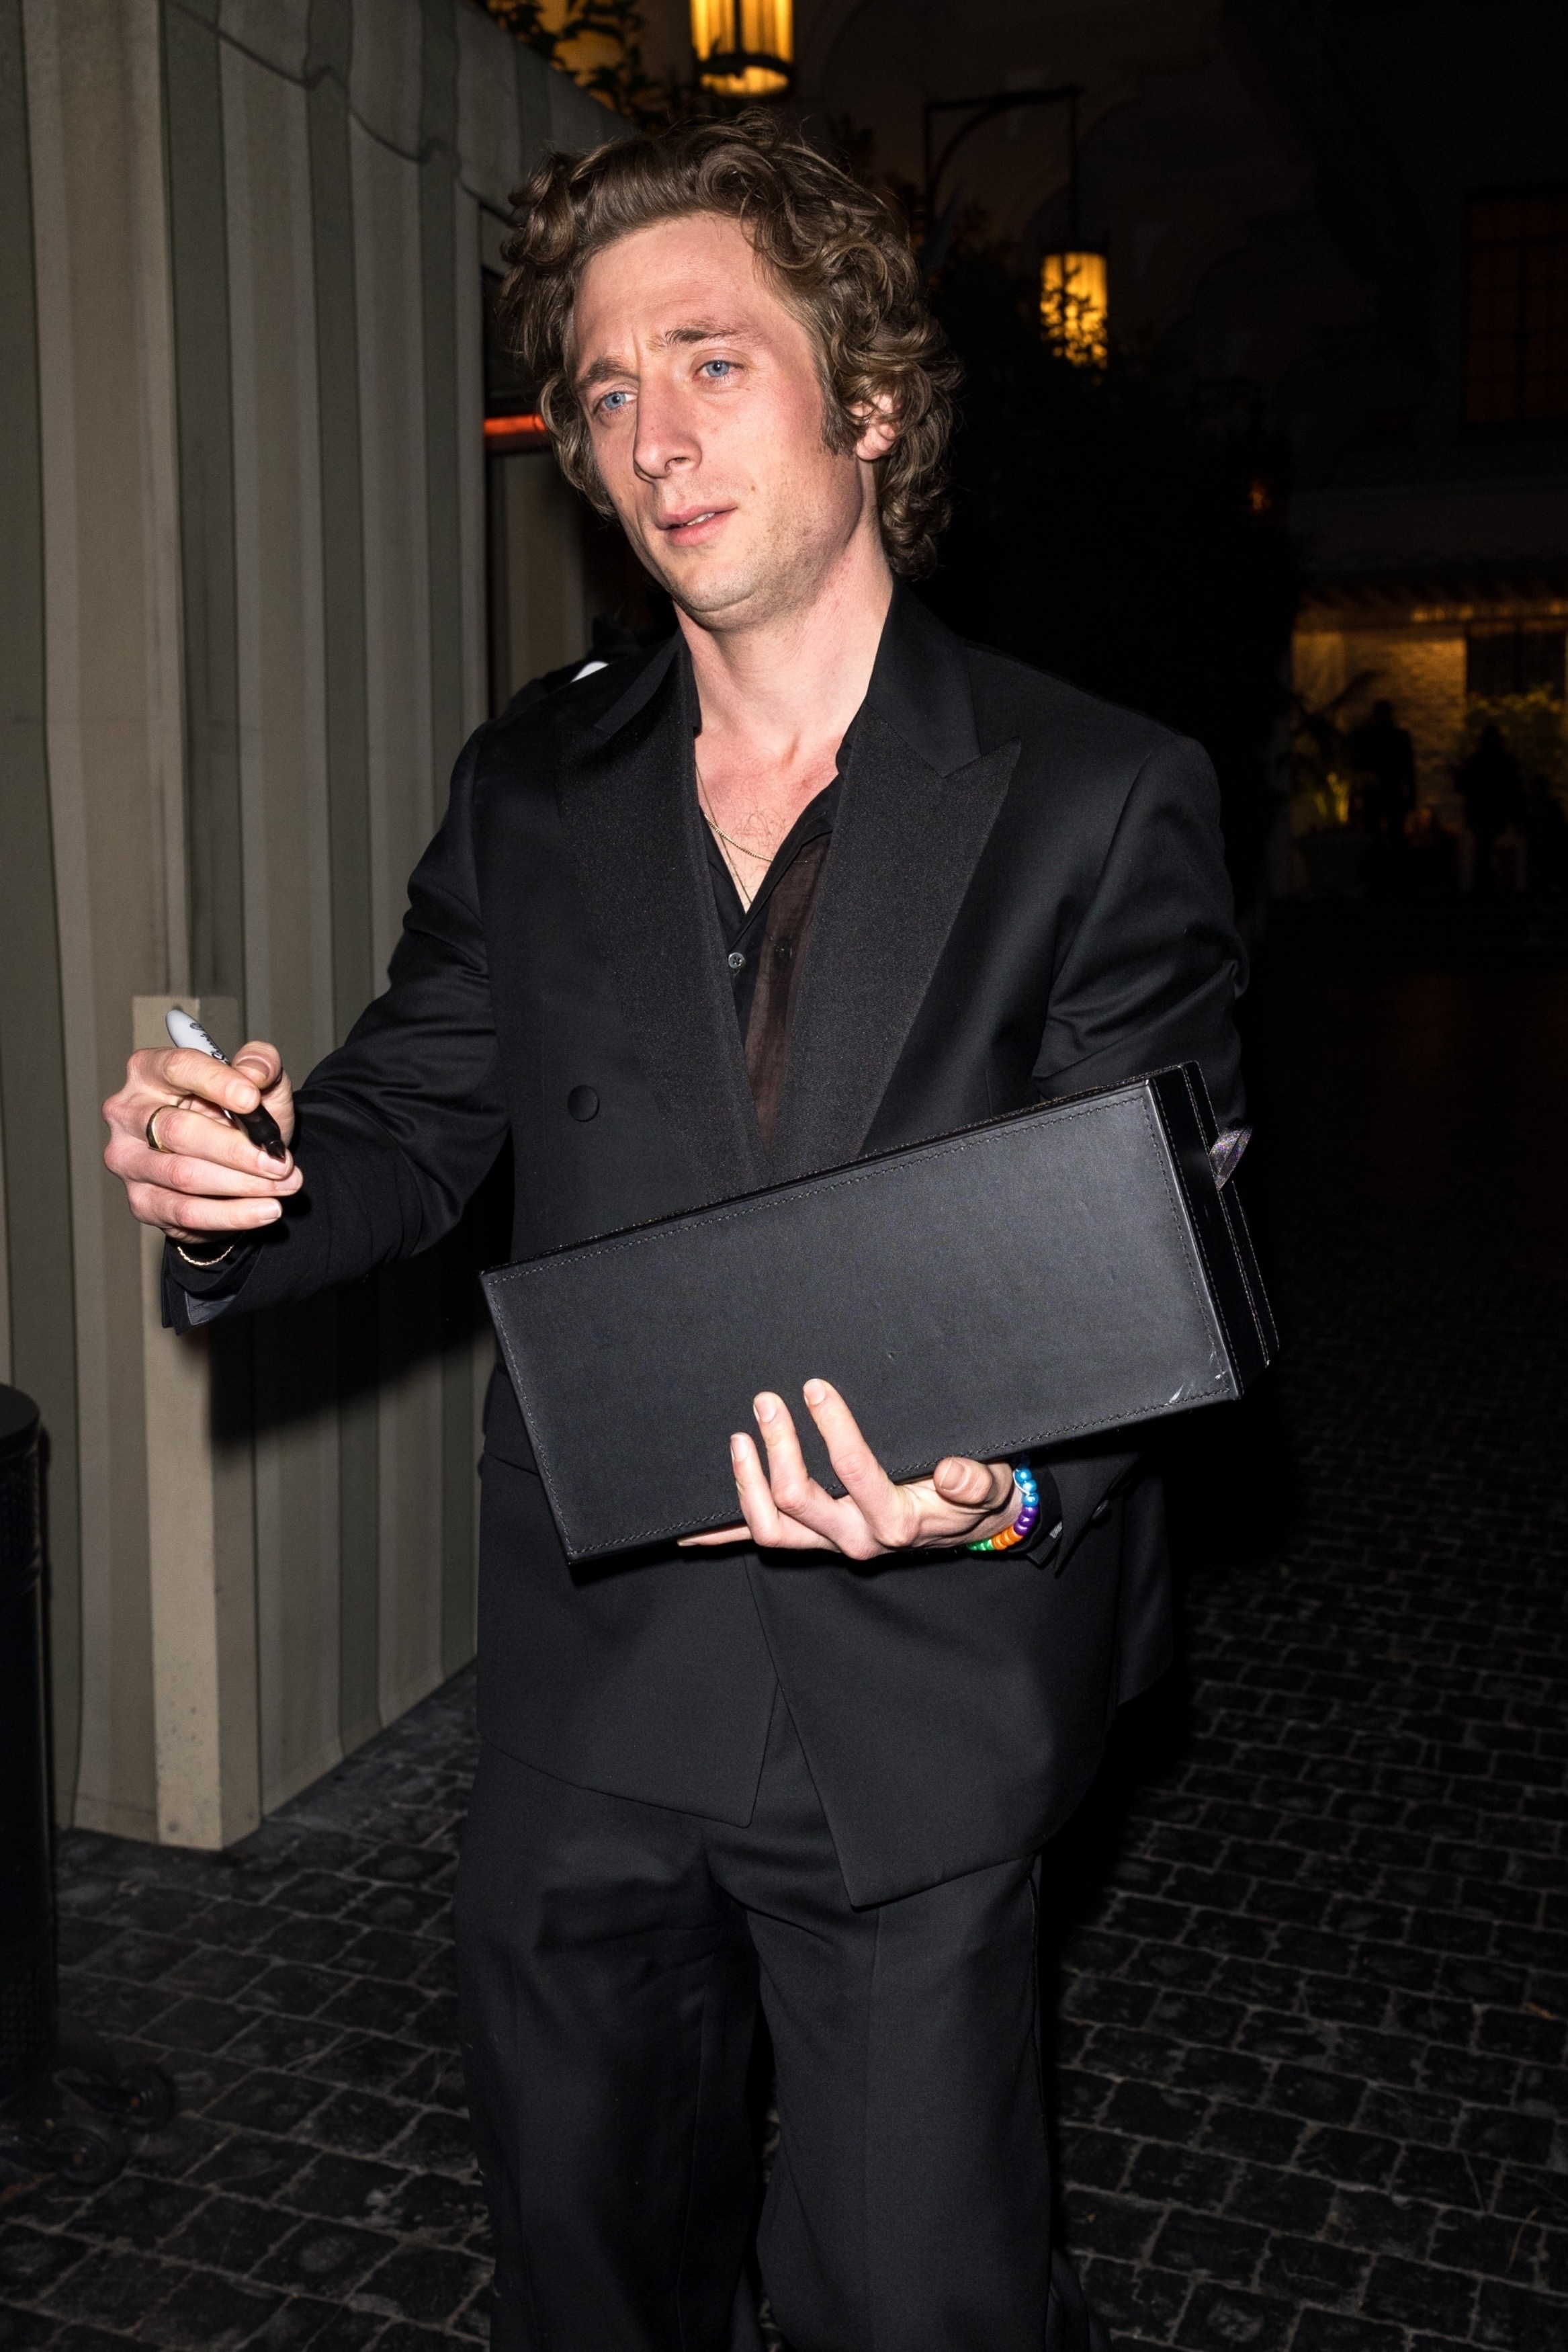 Jeremy Allen White looked seemingly frazzled after the wild party